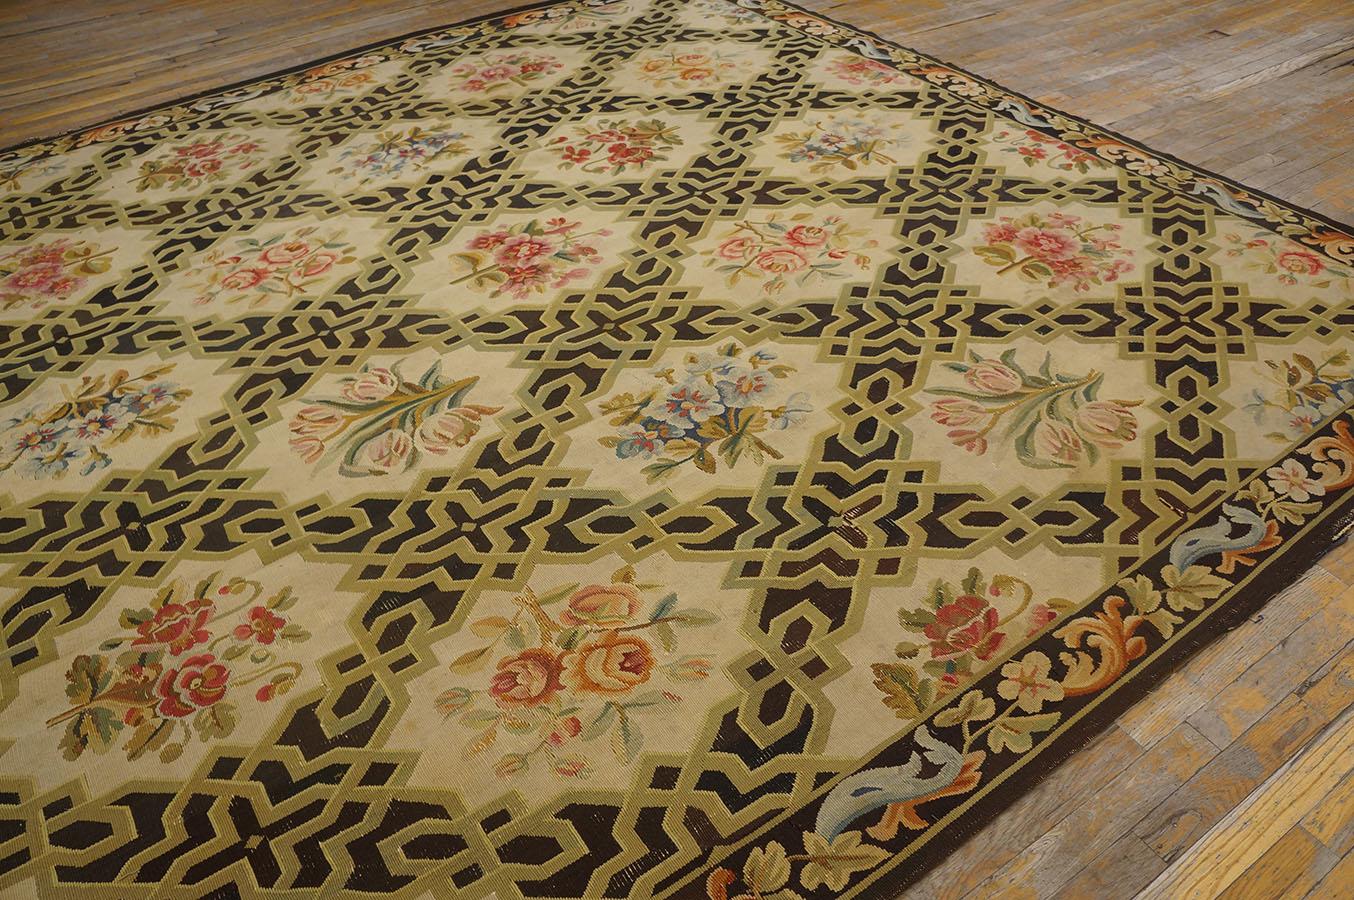 Early 20th Century French Aubusson Carpet ( 9' 8'' x 15' 3'' - 295 x 465 cm ) For Sale 1